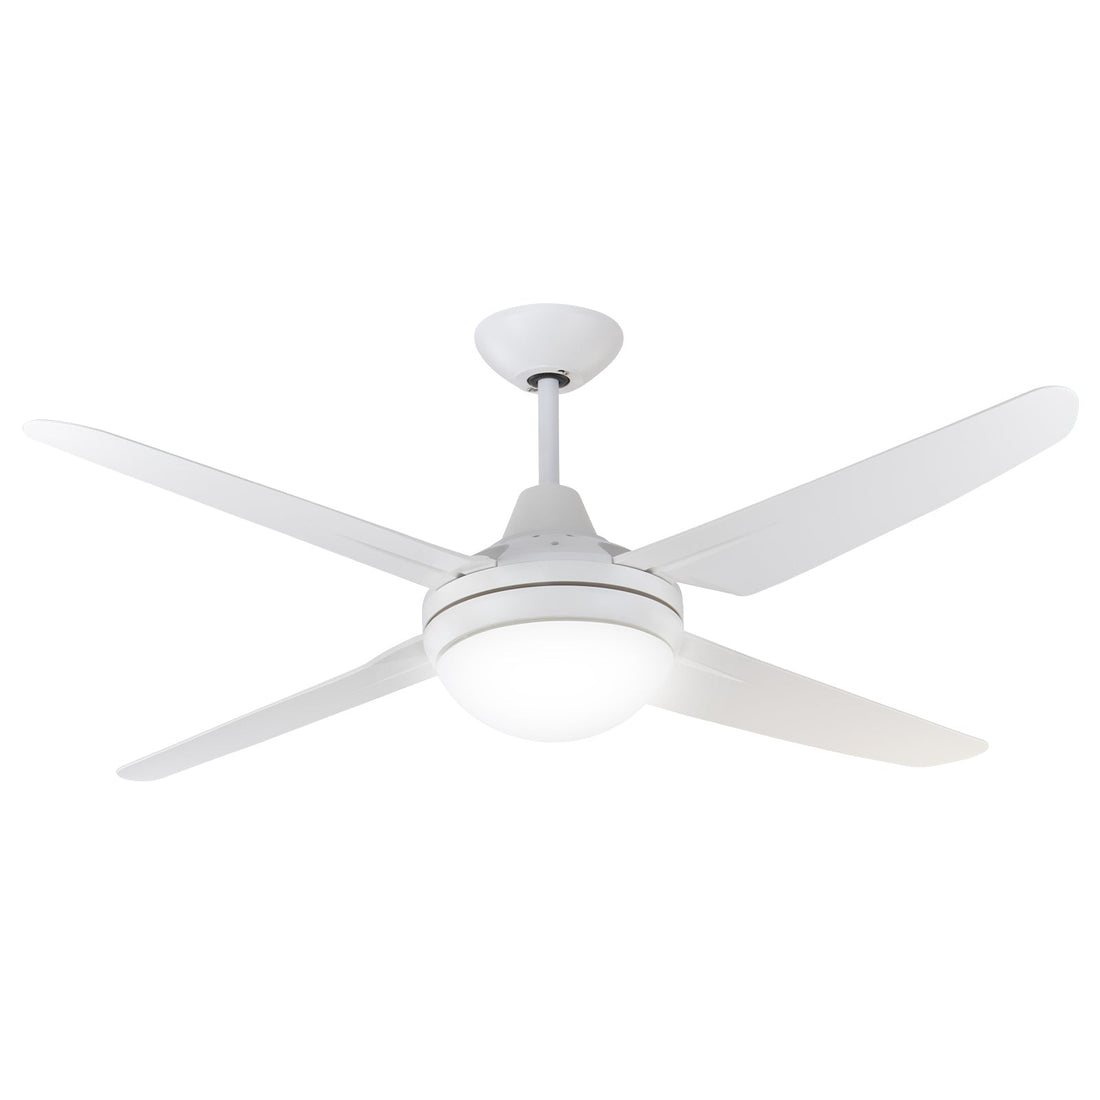 Clare AC Ceiling Fan with B22 Light Mercator